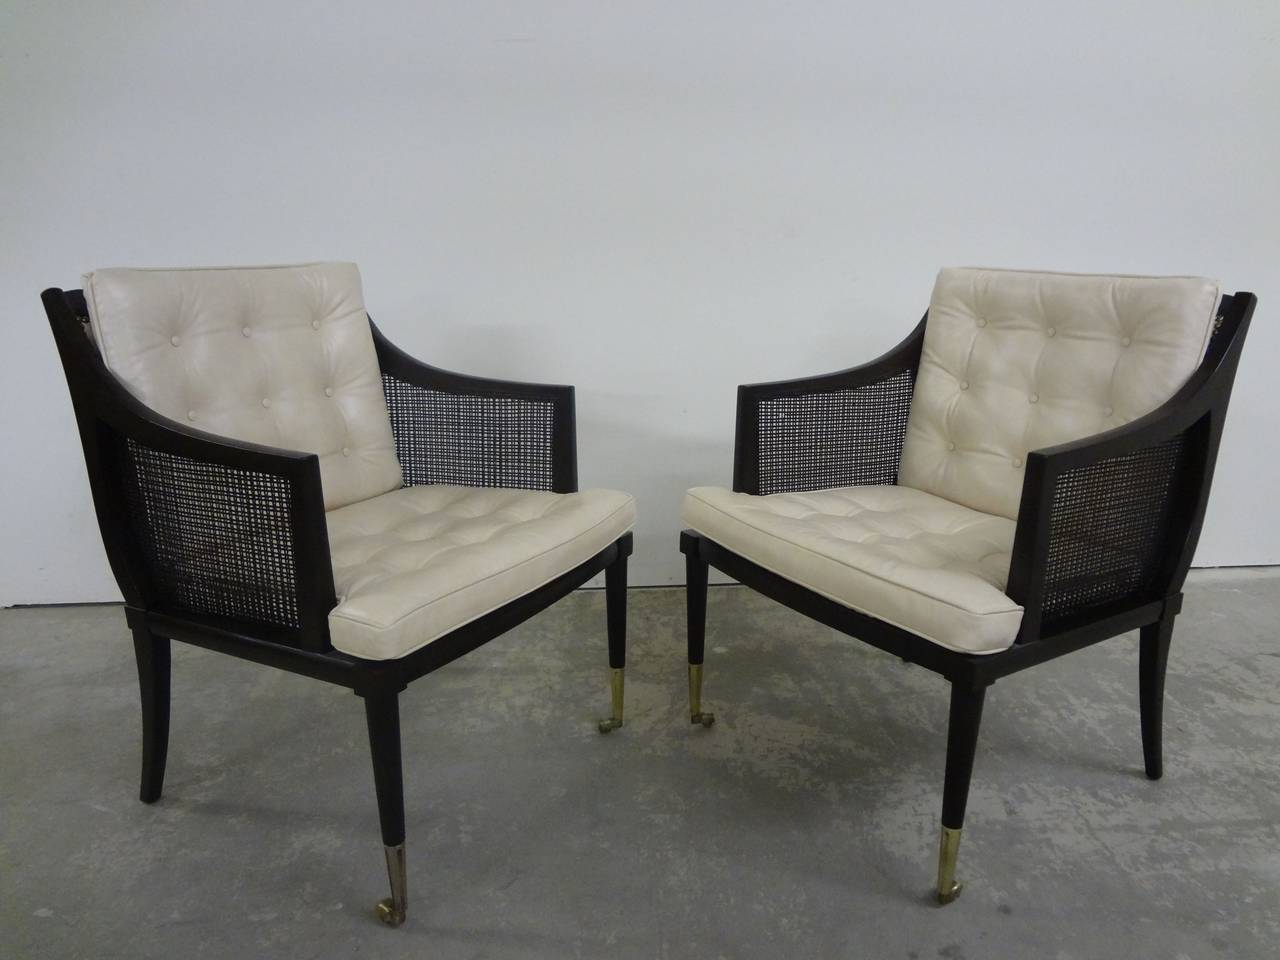 Pair of modern Probber style chairs with cane sides and leather, tufted seats. Brass trim to rear leather panel and front feet as shown.